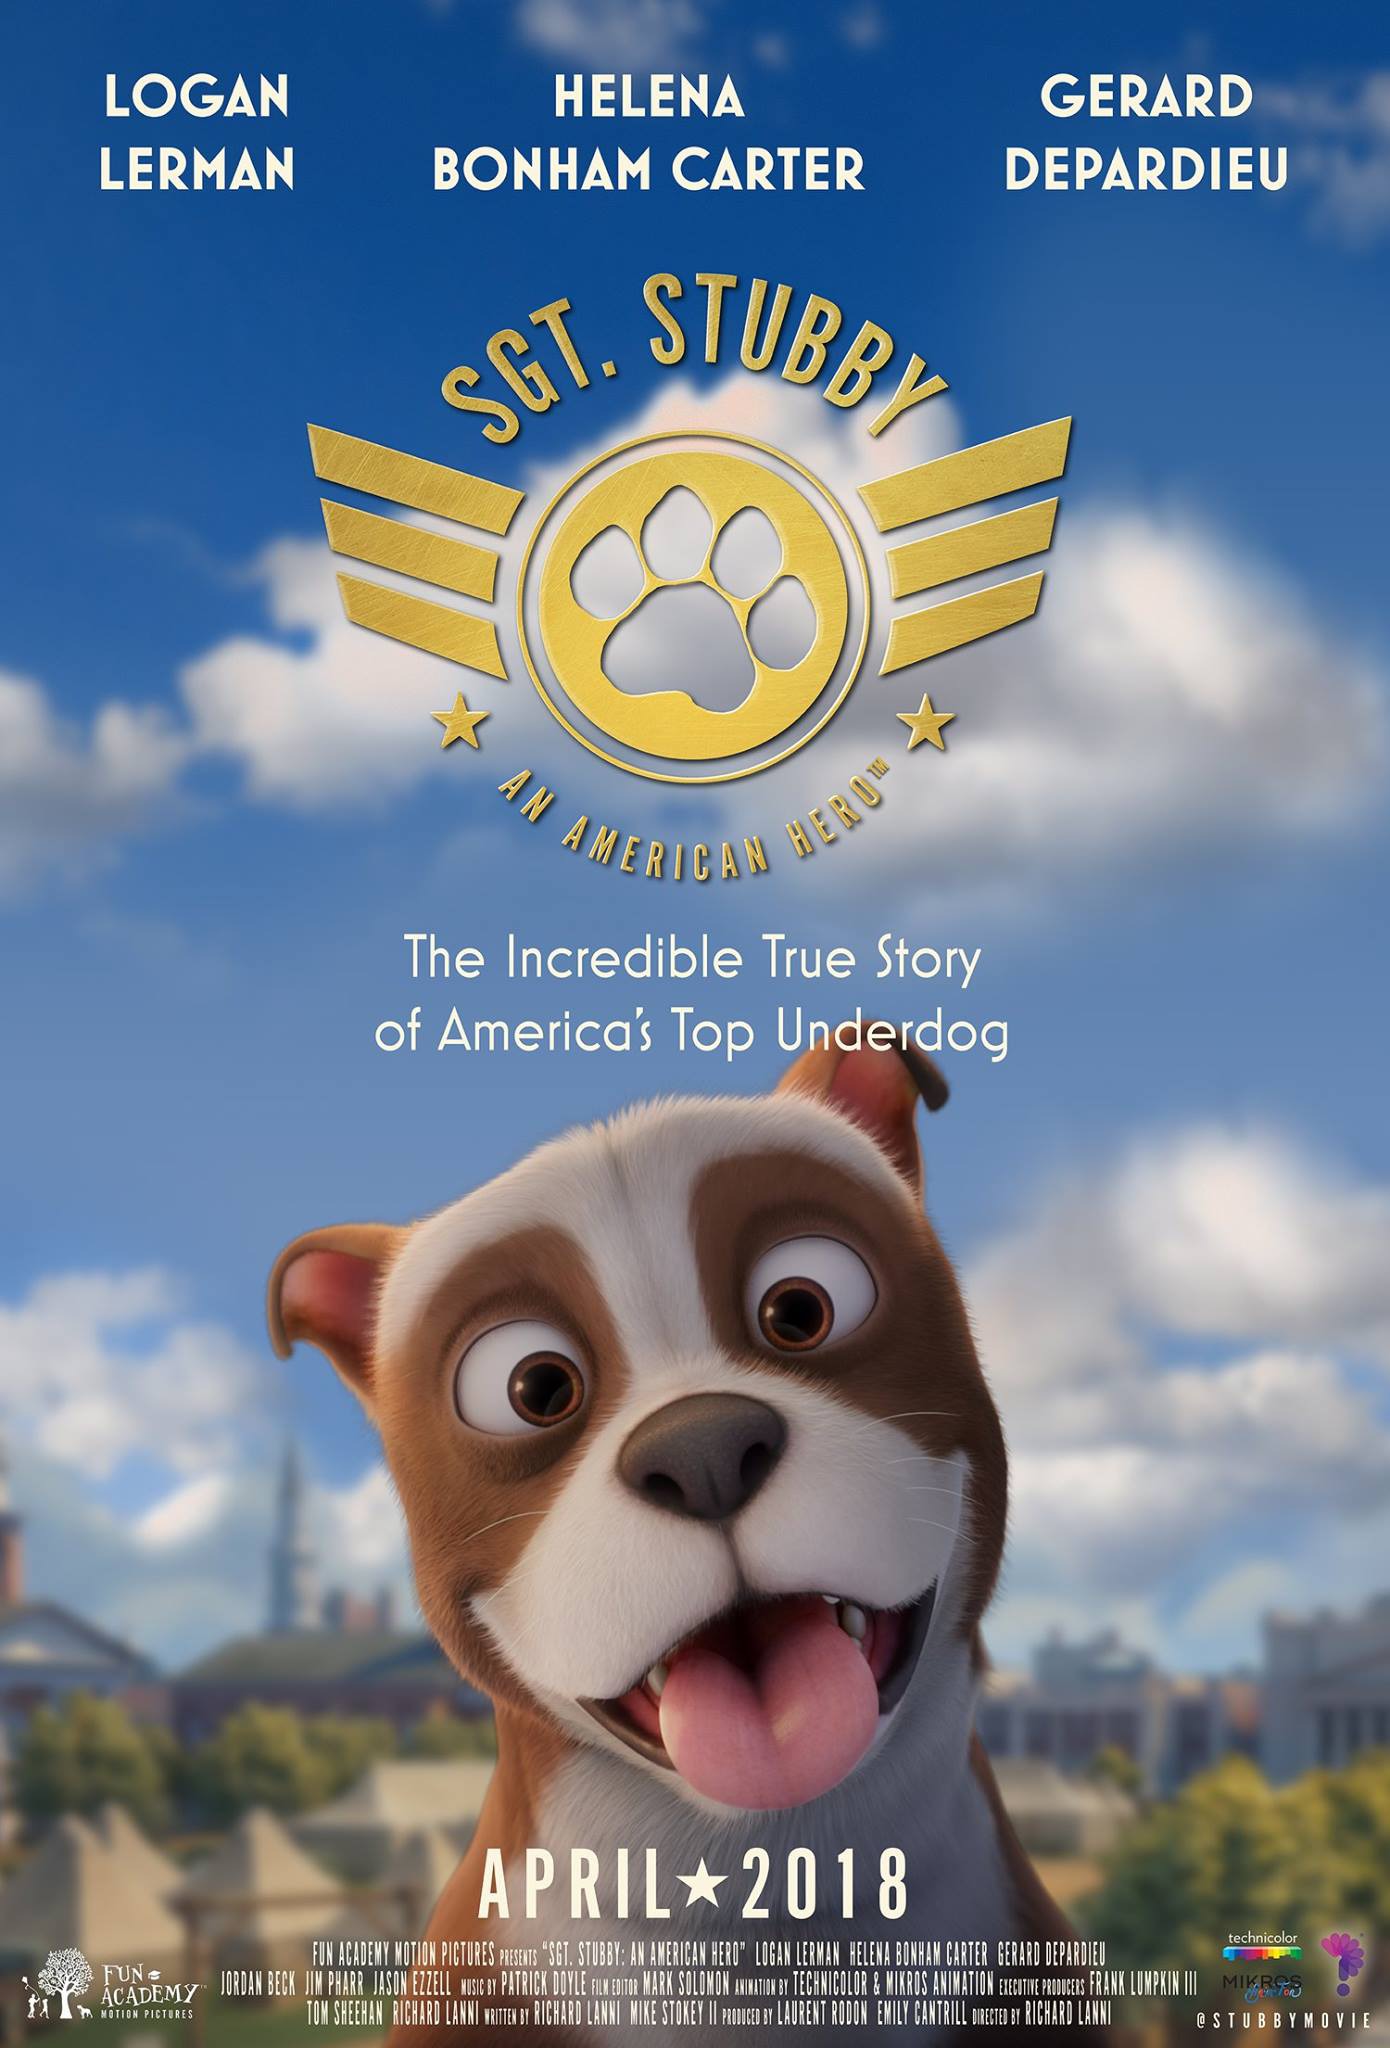 Sgt. Stubby: An American Hero (#2 of 2): Mega Sized Movie Poster Image -  IMP Awards